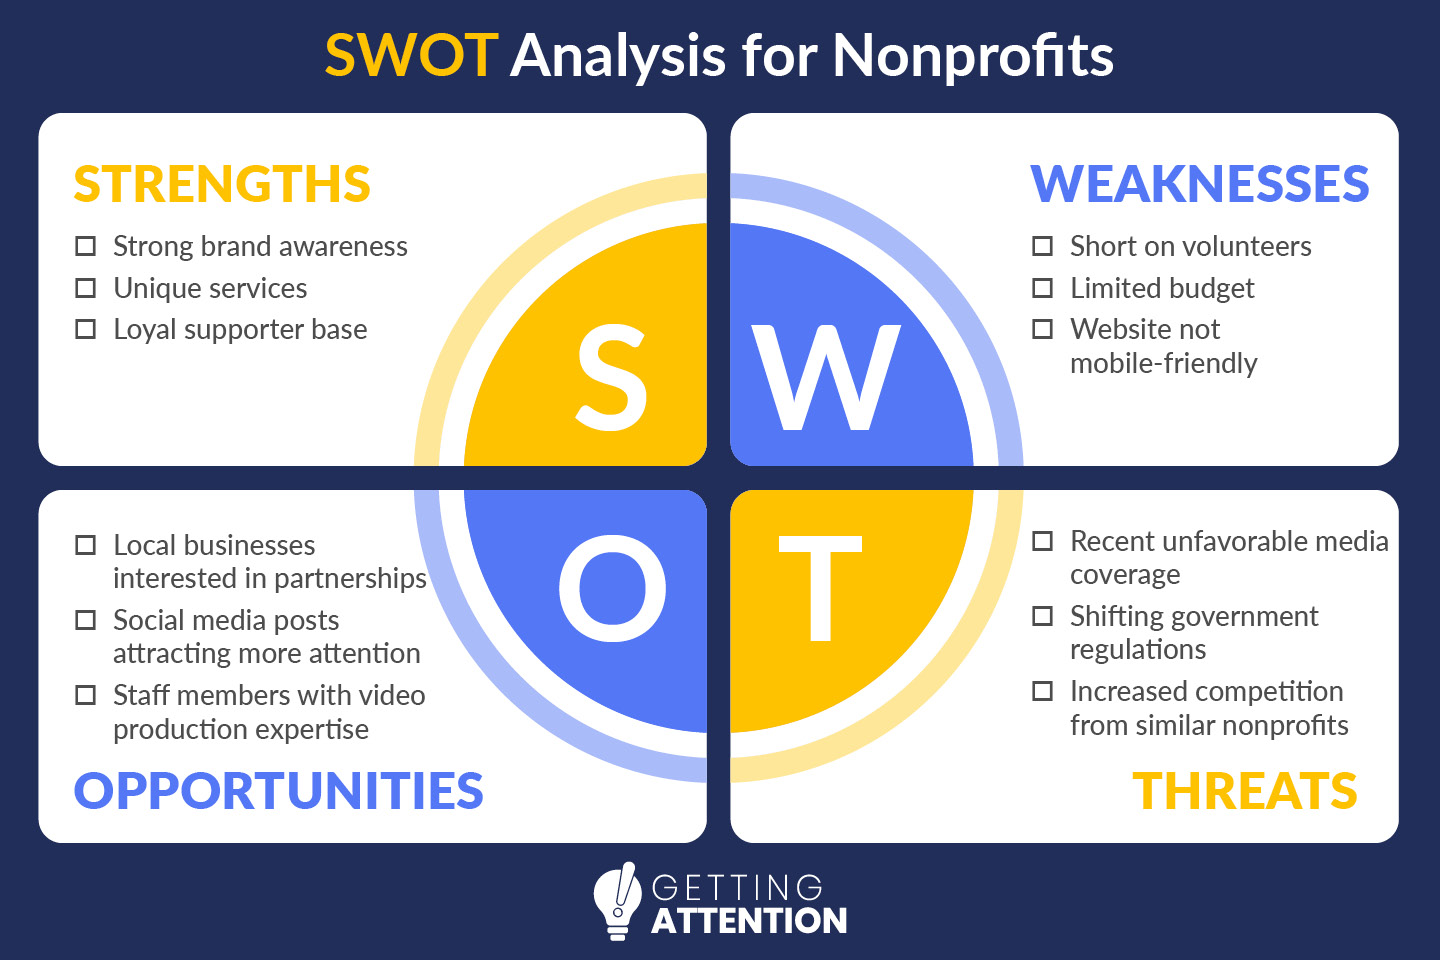 This image illustrates how you can use a SWOT analysis to conduct an audit and learn from your past nonprofit marketing efforts.